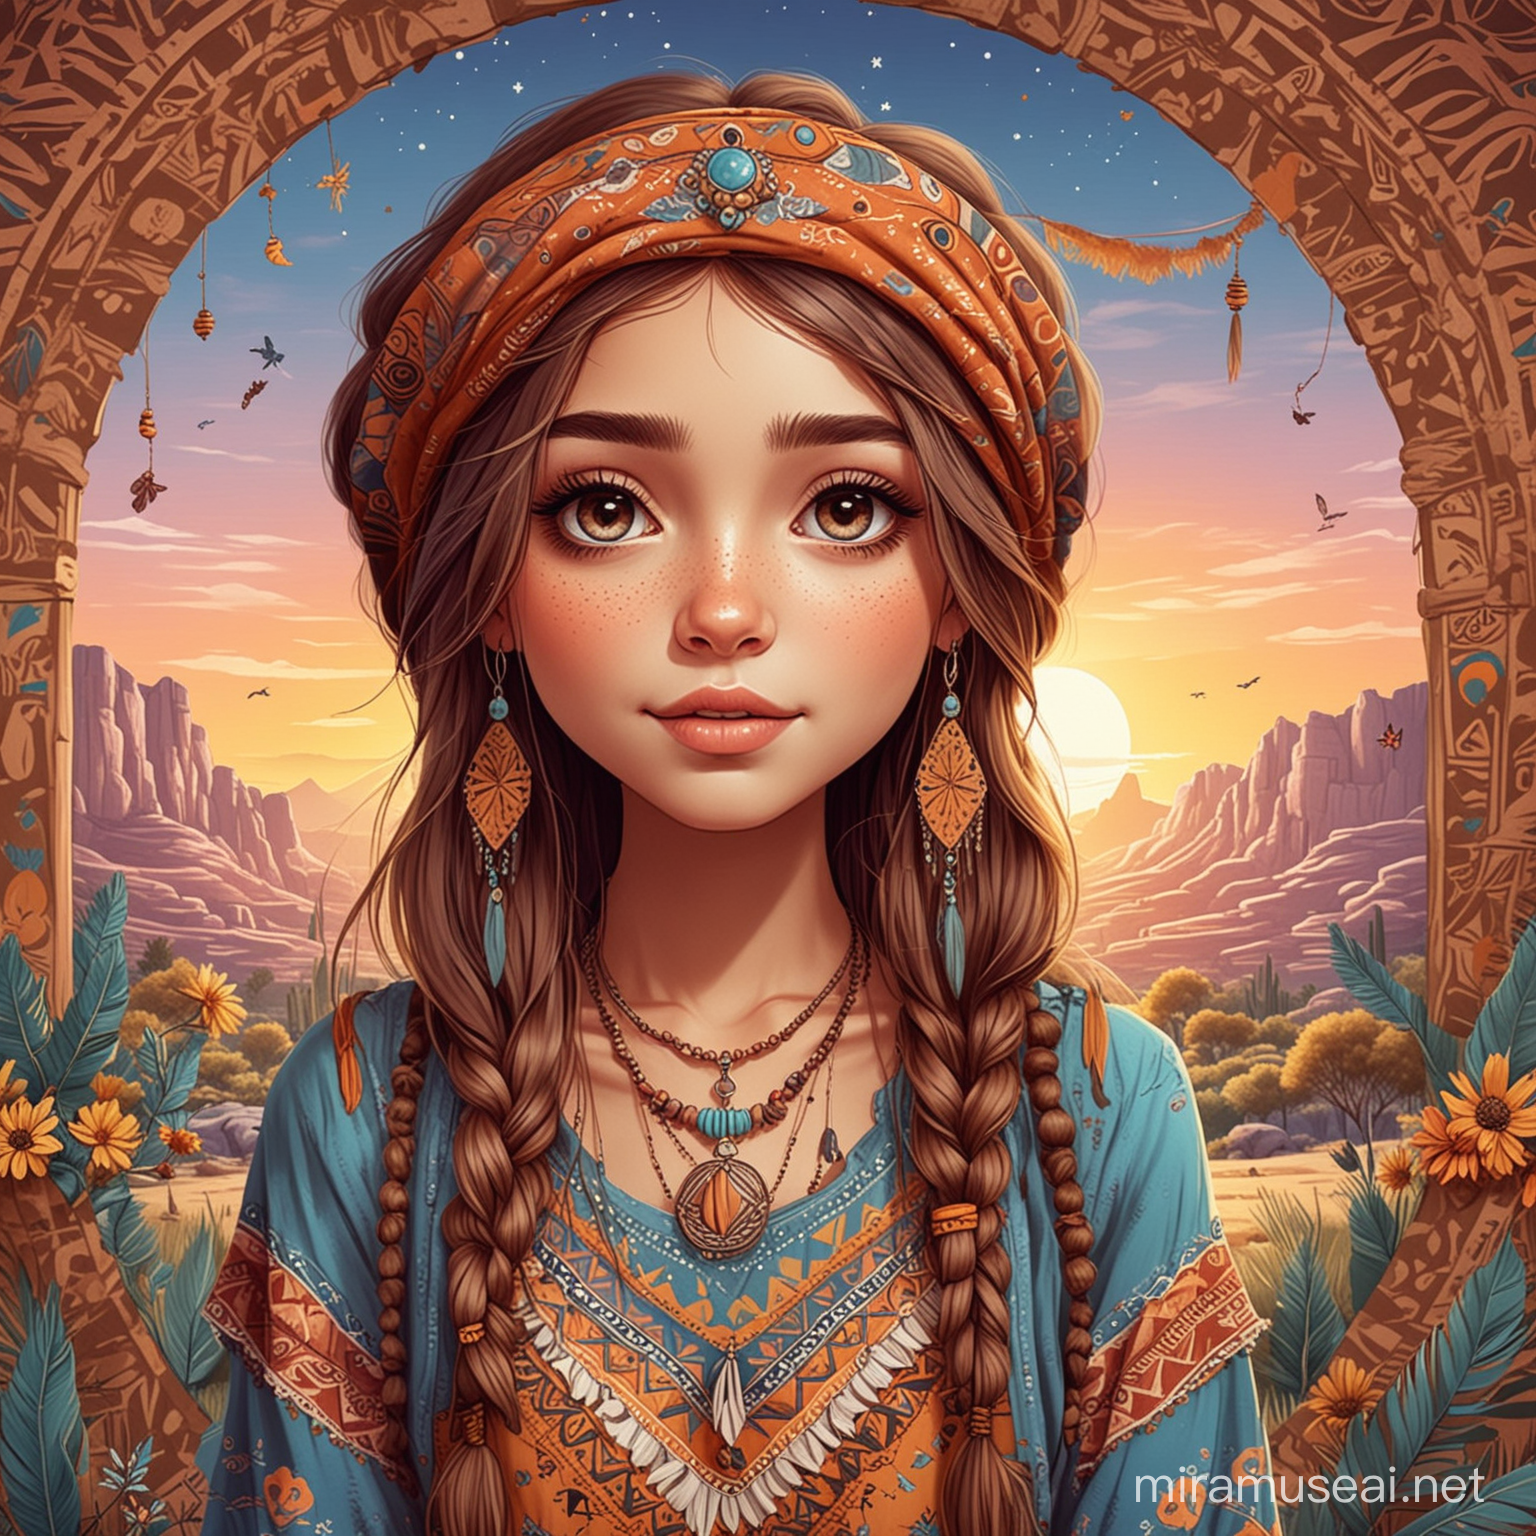 a boho girl in cartoon style with a nice background